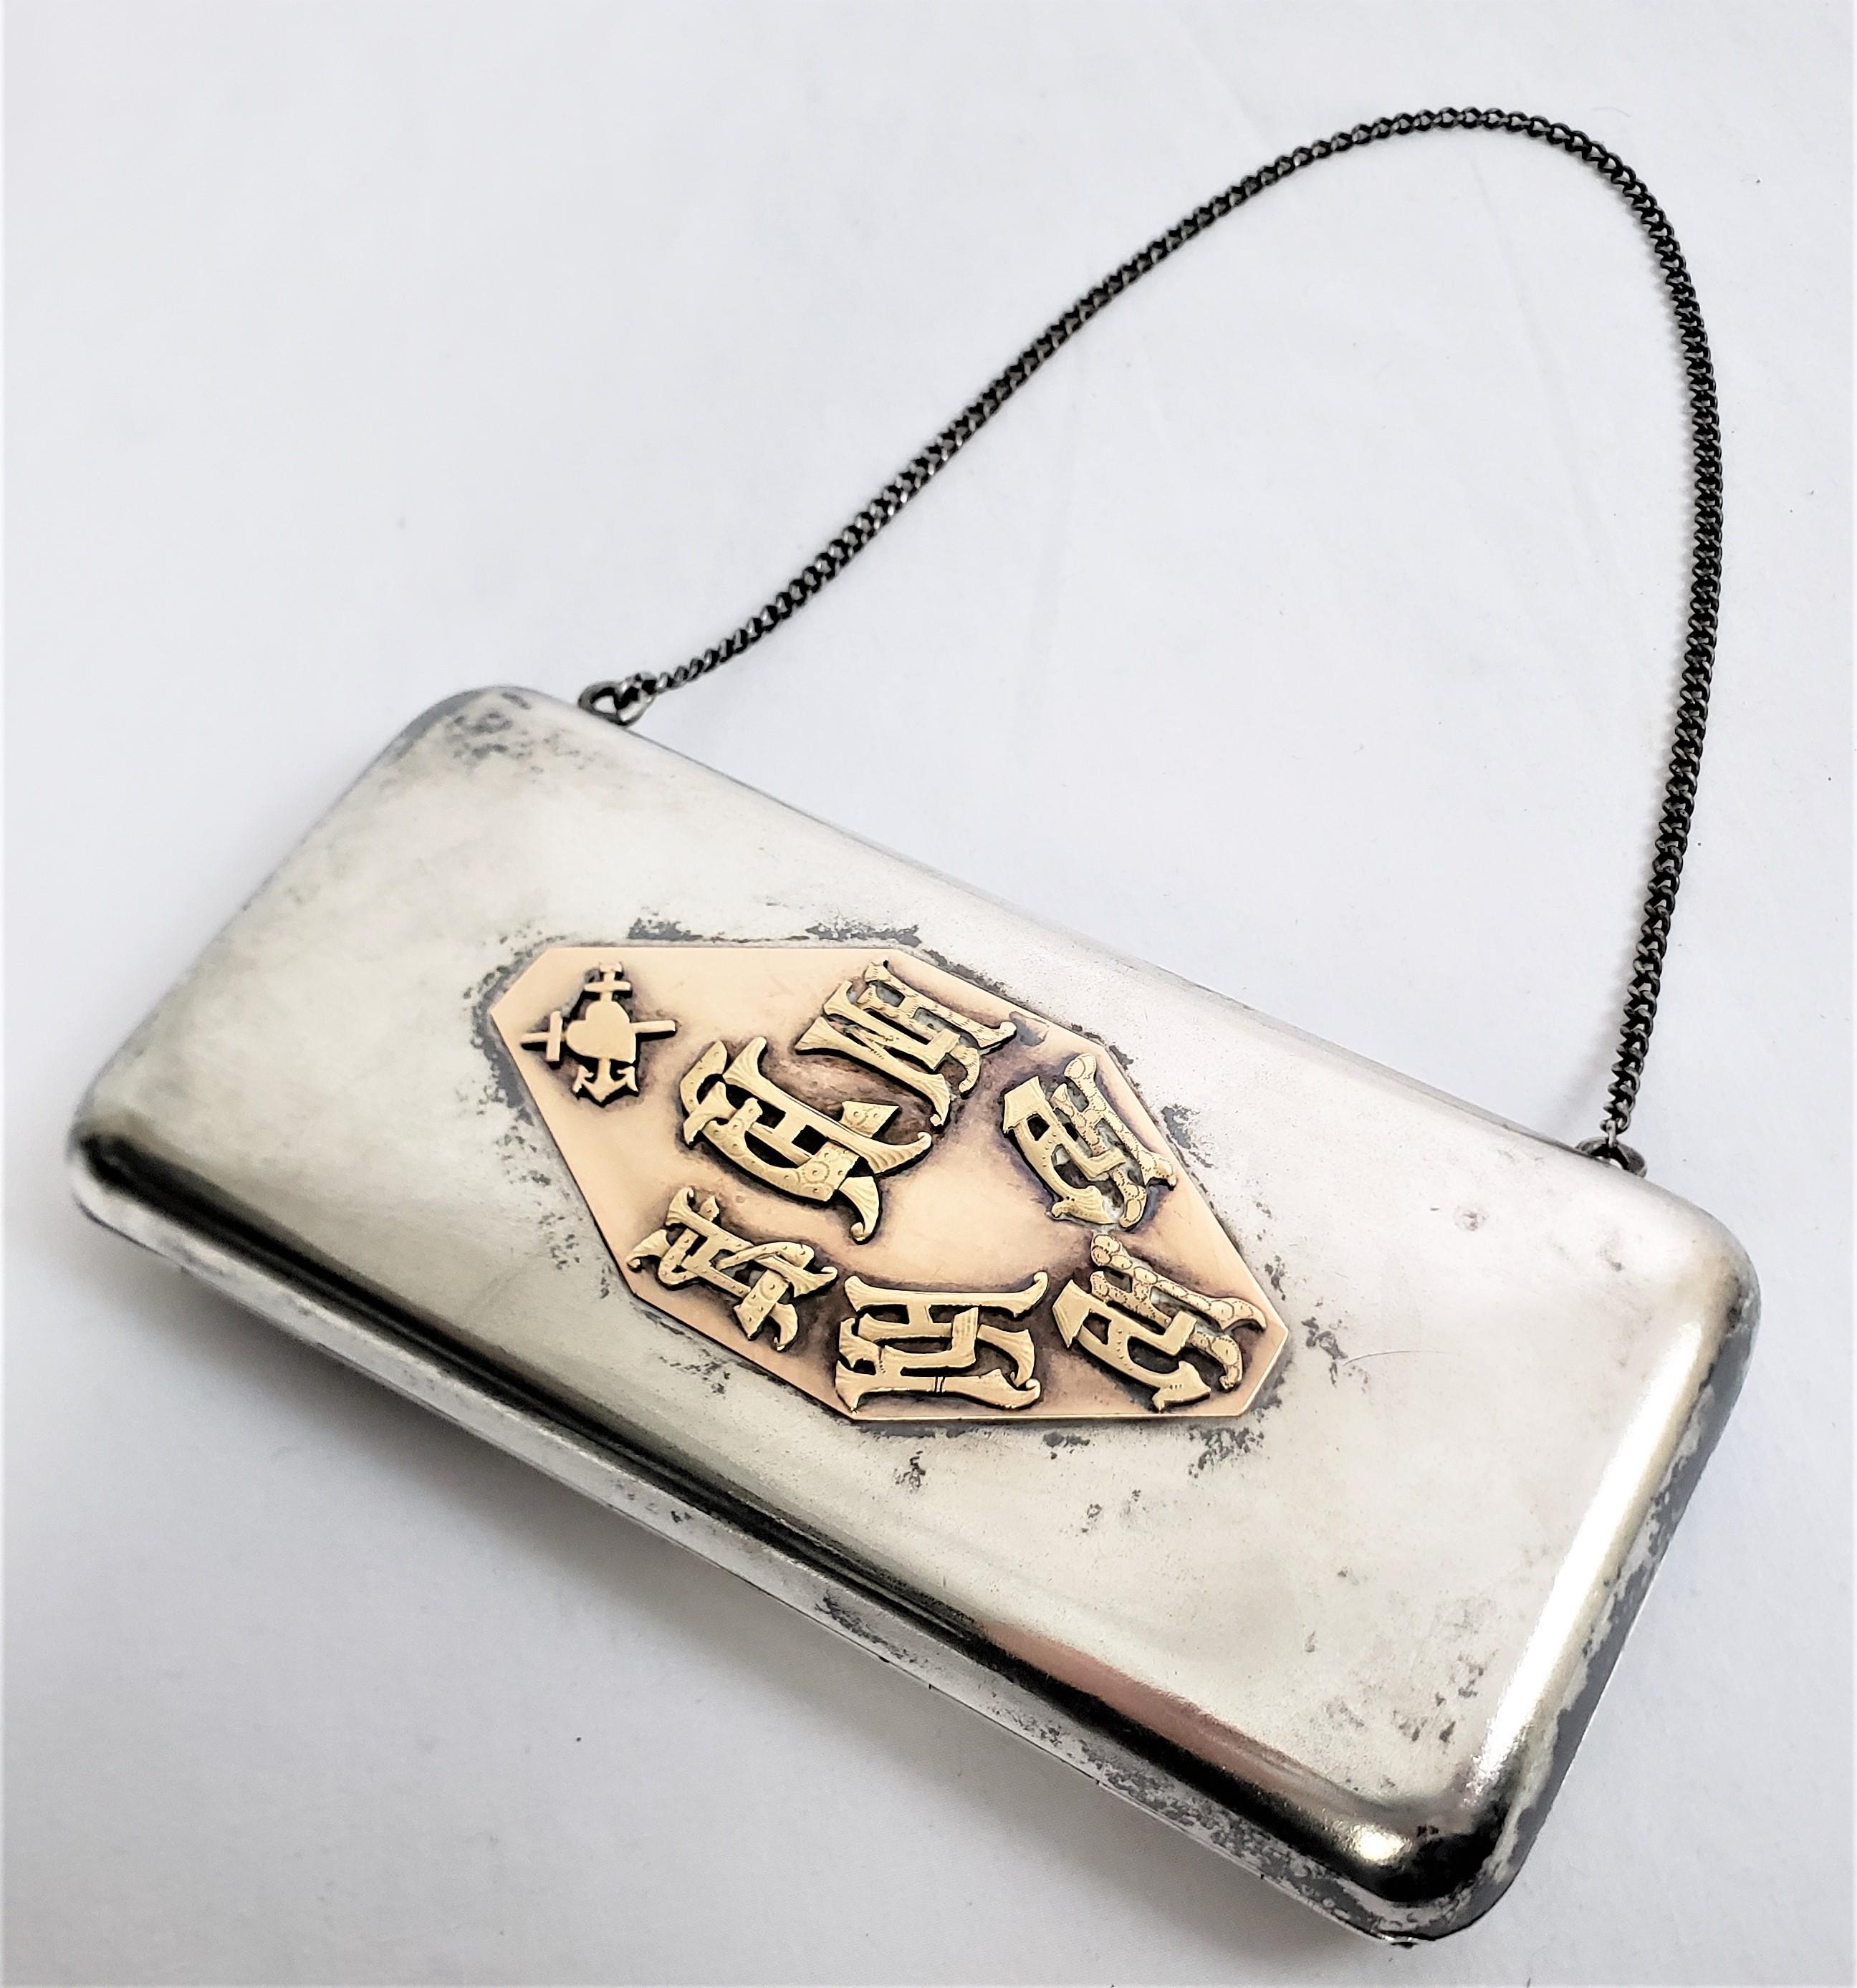 This antique ladies clutch purse or evening case is unsigned, but presumed to have originated from Tsarist Russia and date to approximately 1900 and done in their ttraditional Imperialist style. The case itself and chain are composed of 840 silver